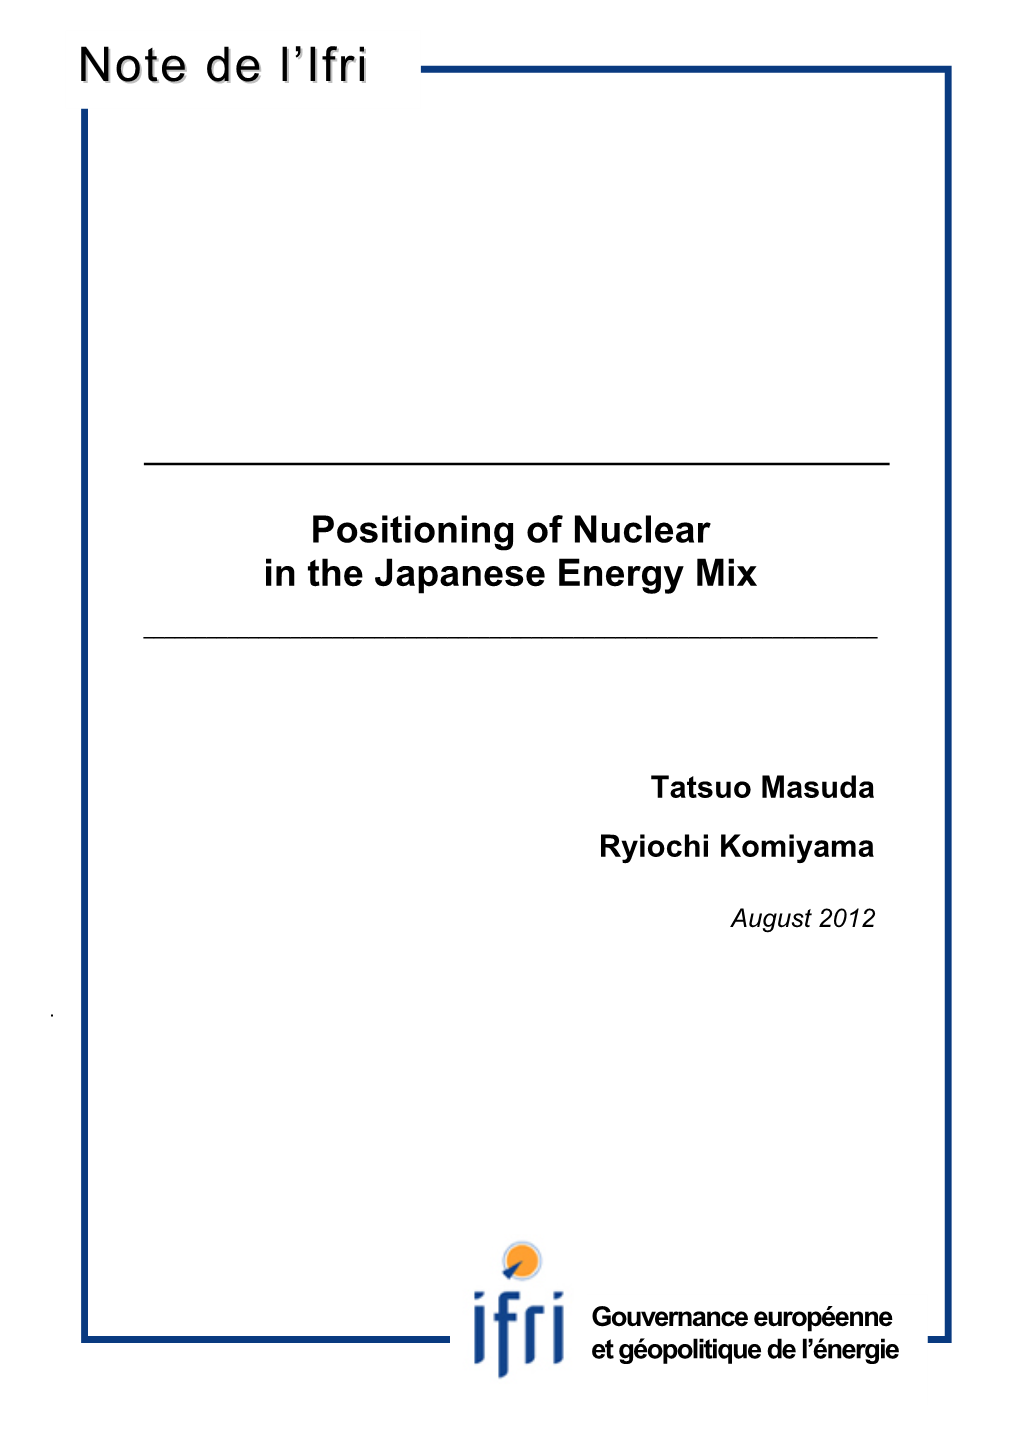 Positioning of Nuclear in the Japanese Energy Mix